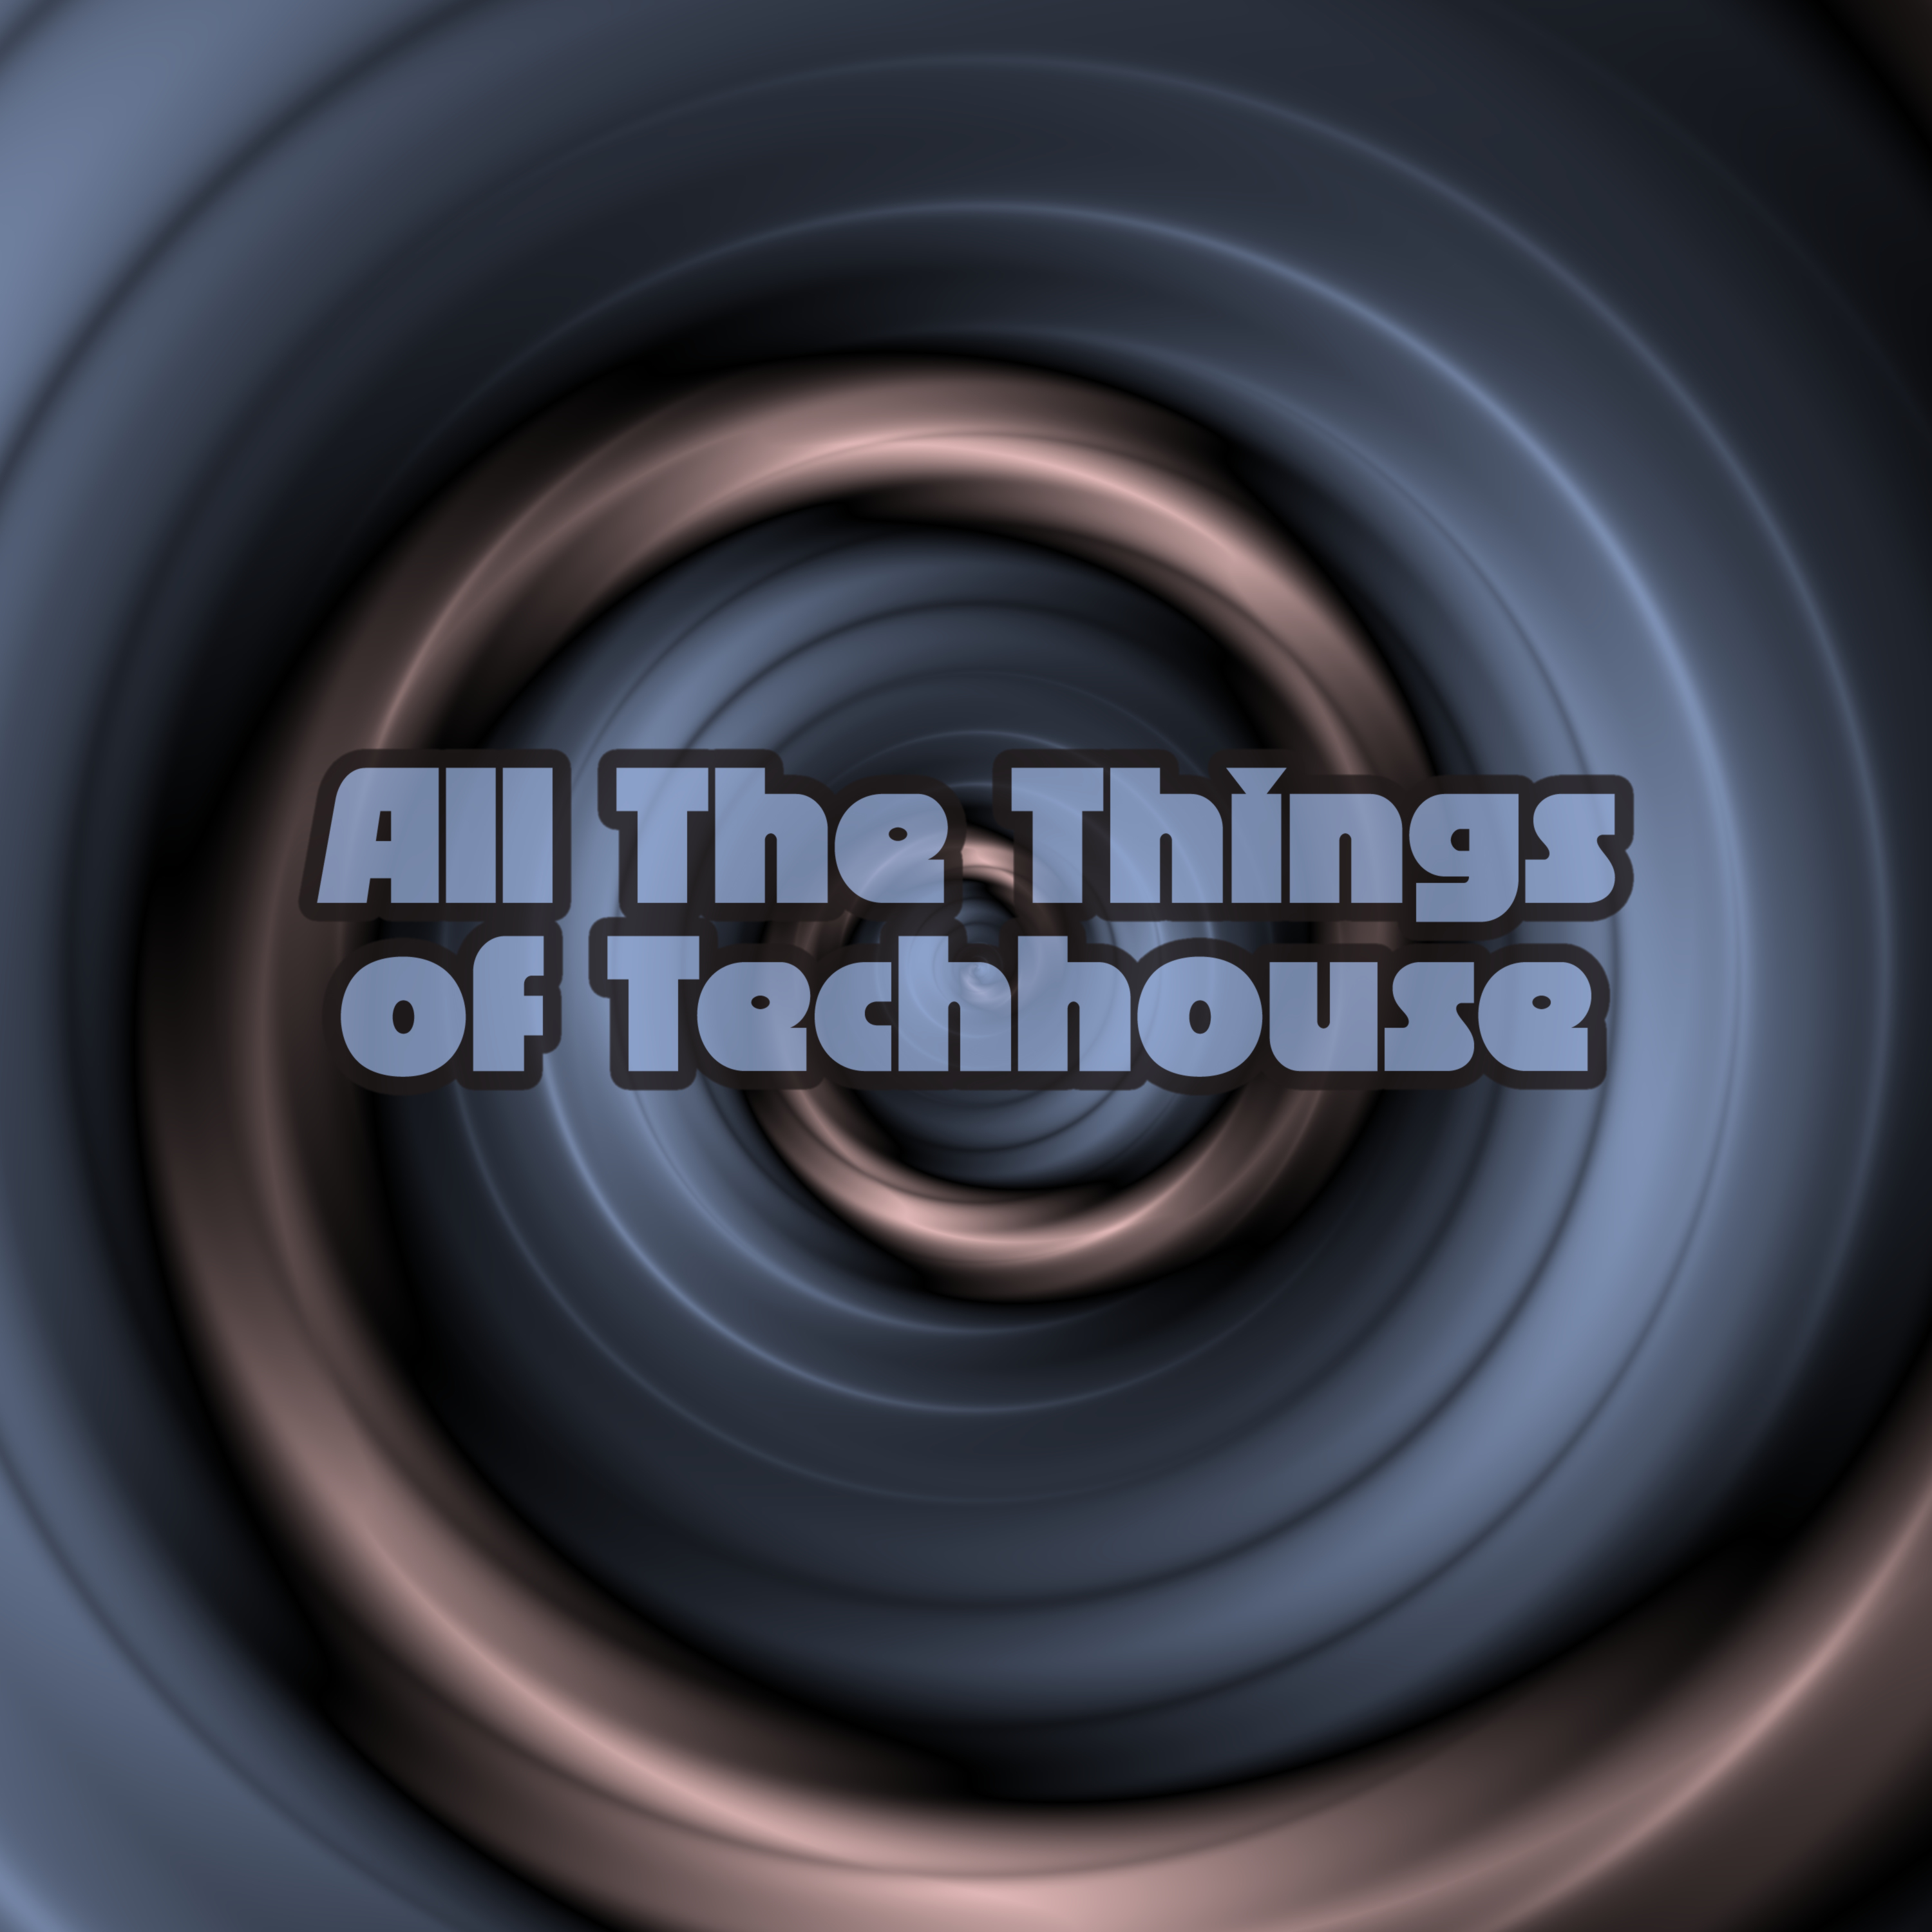 All the Things of Techhouse